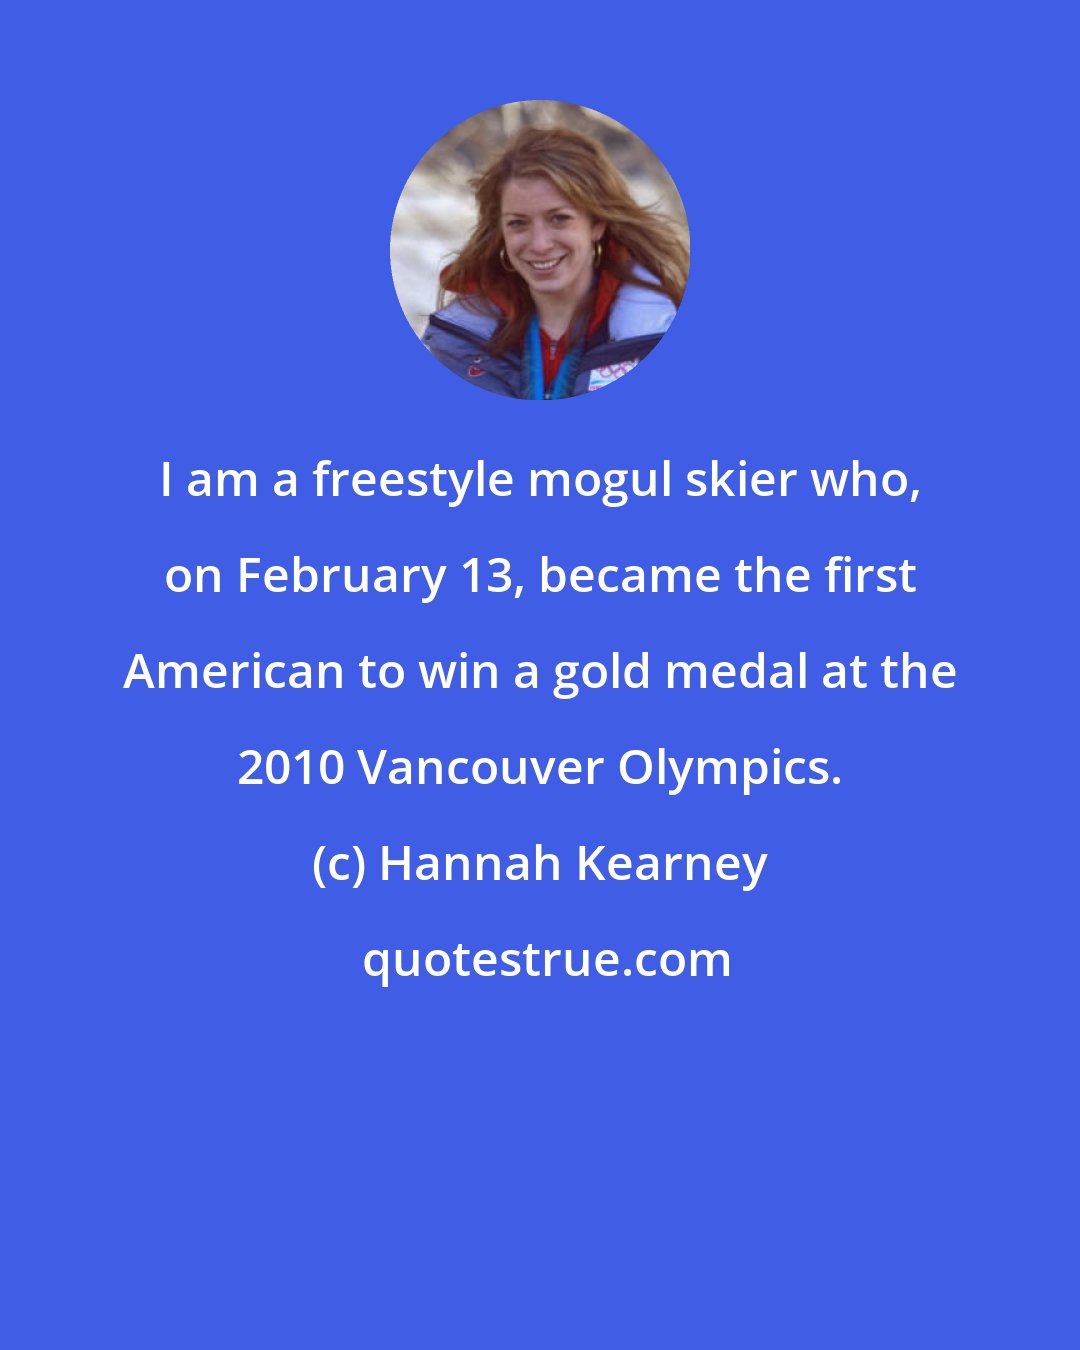 Hannah Kearney: I am a freestyle mogul skier who, on February 13, became the first American to win a gold medal at the 2010 Vancouver Olympics.